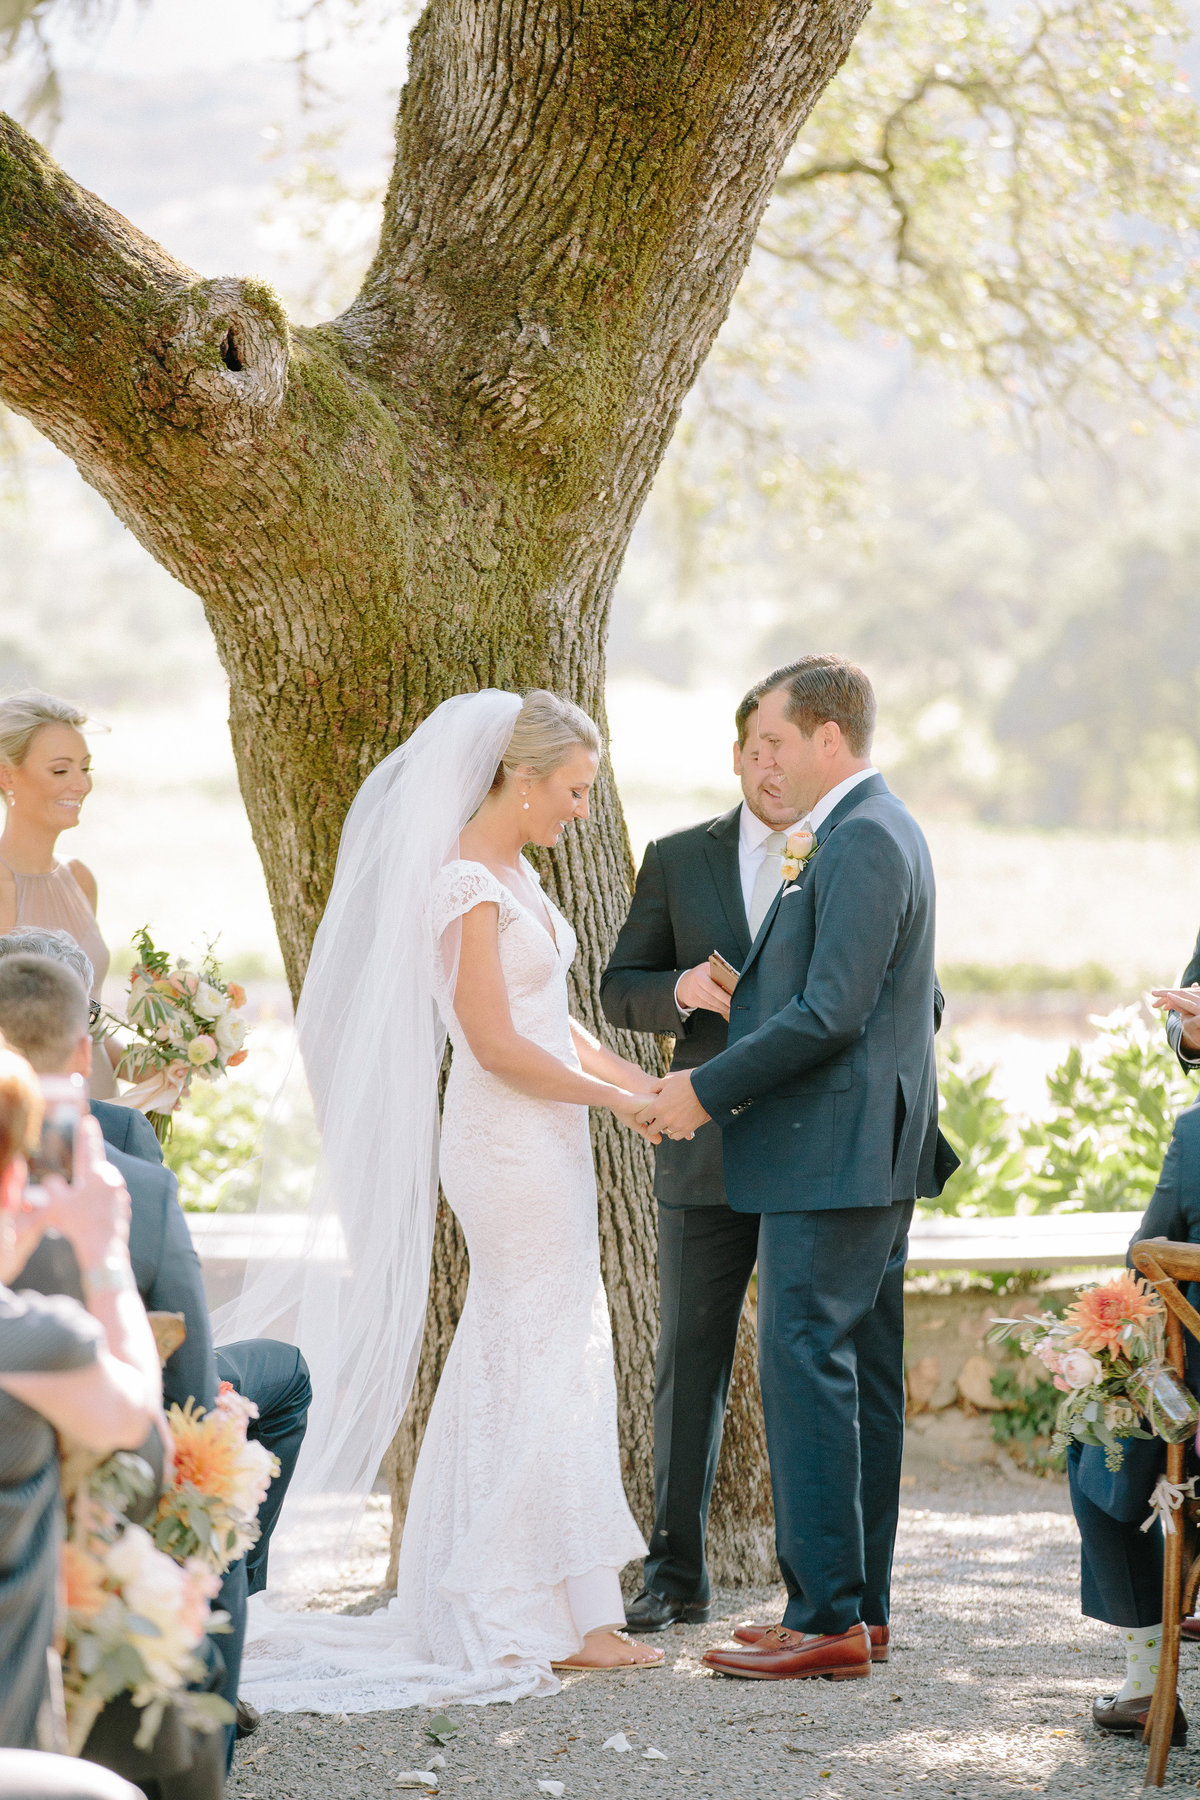 Outdoor ceremony at a wedding at Beltane Ranch in Sonoma.